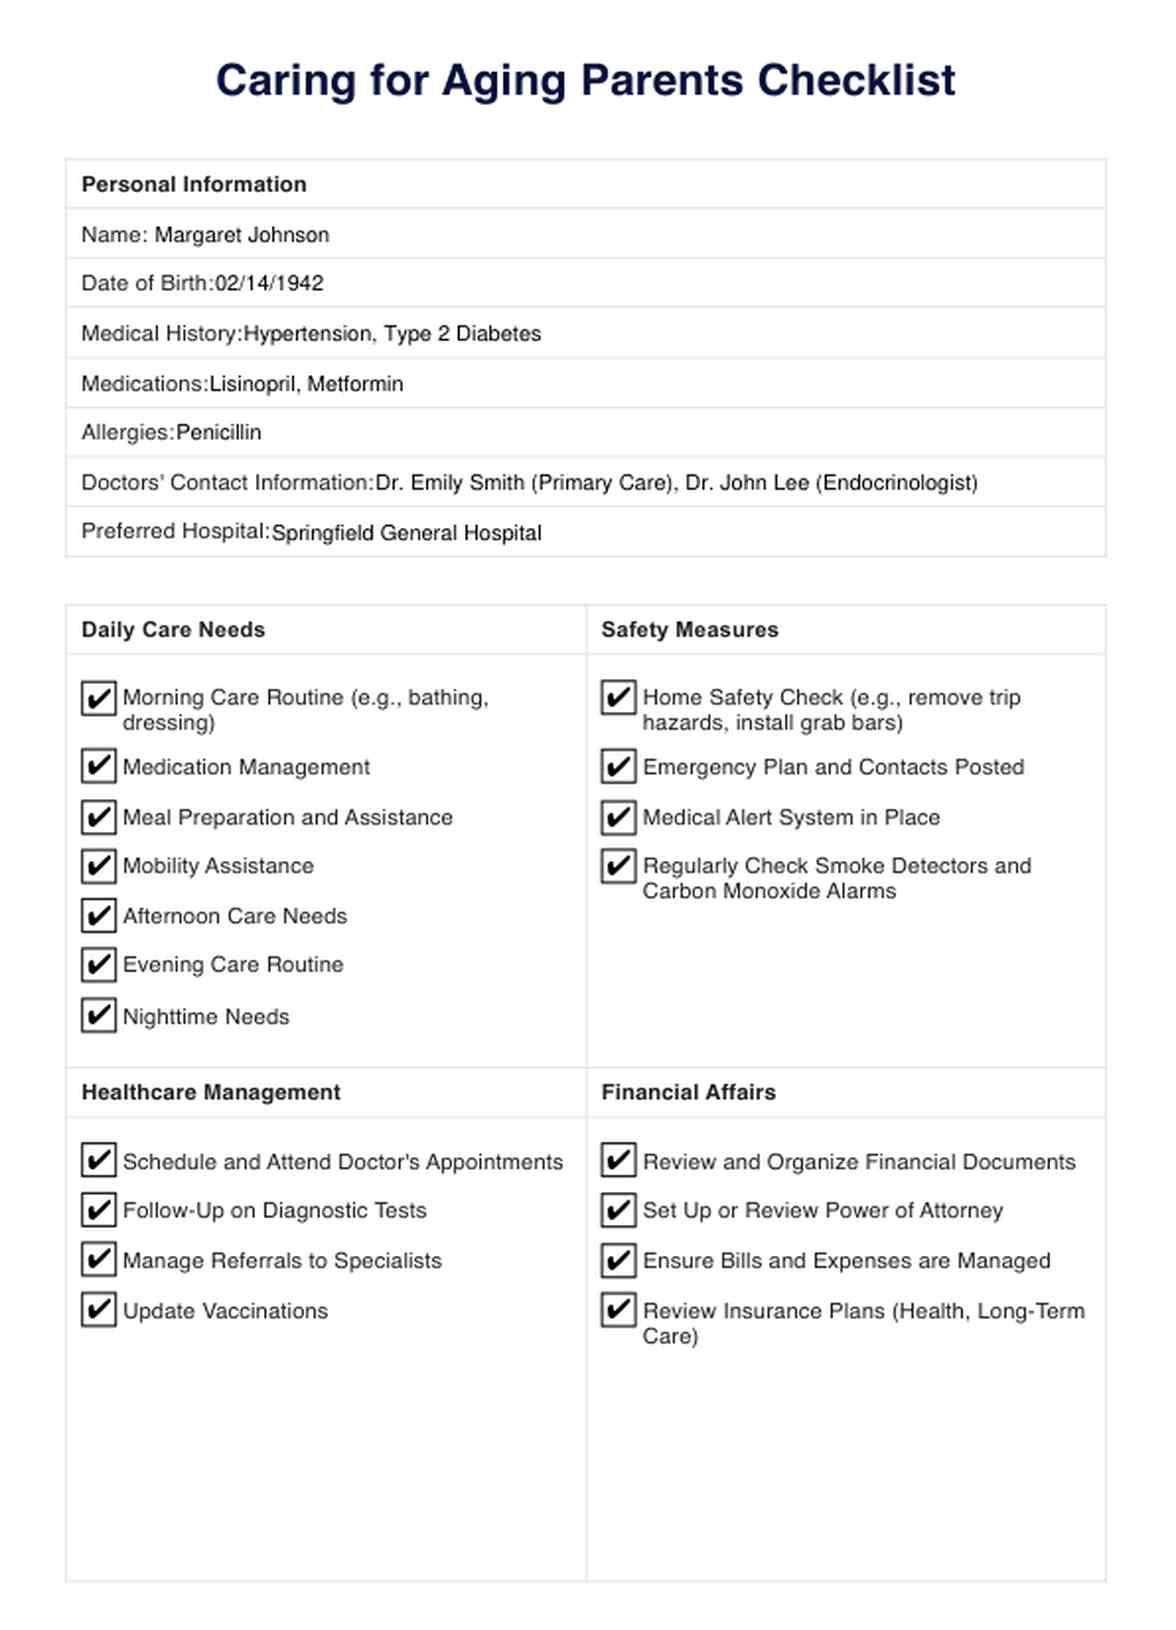 Caring For Aging Parents Checklist PDF Example